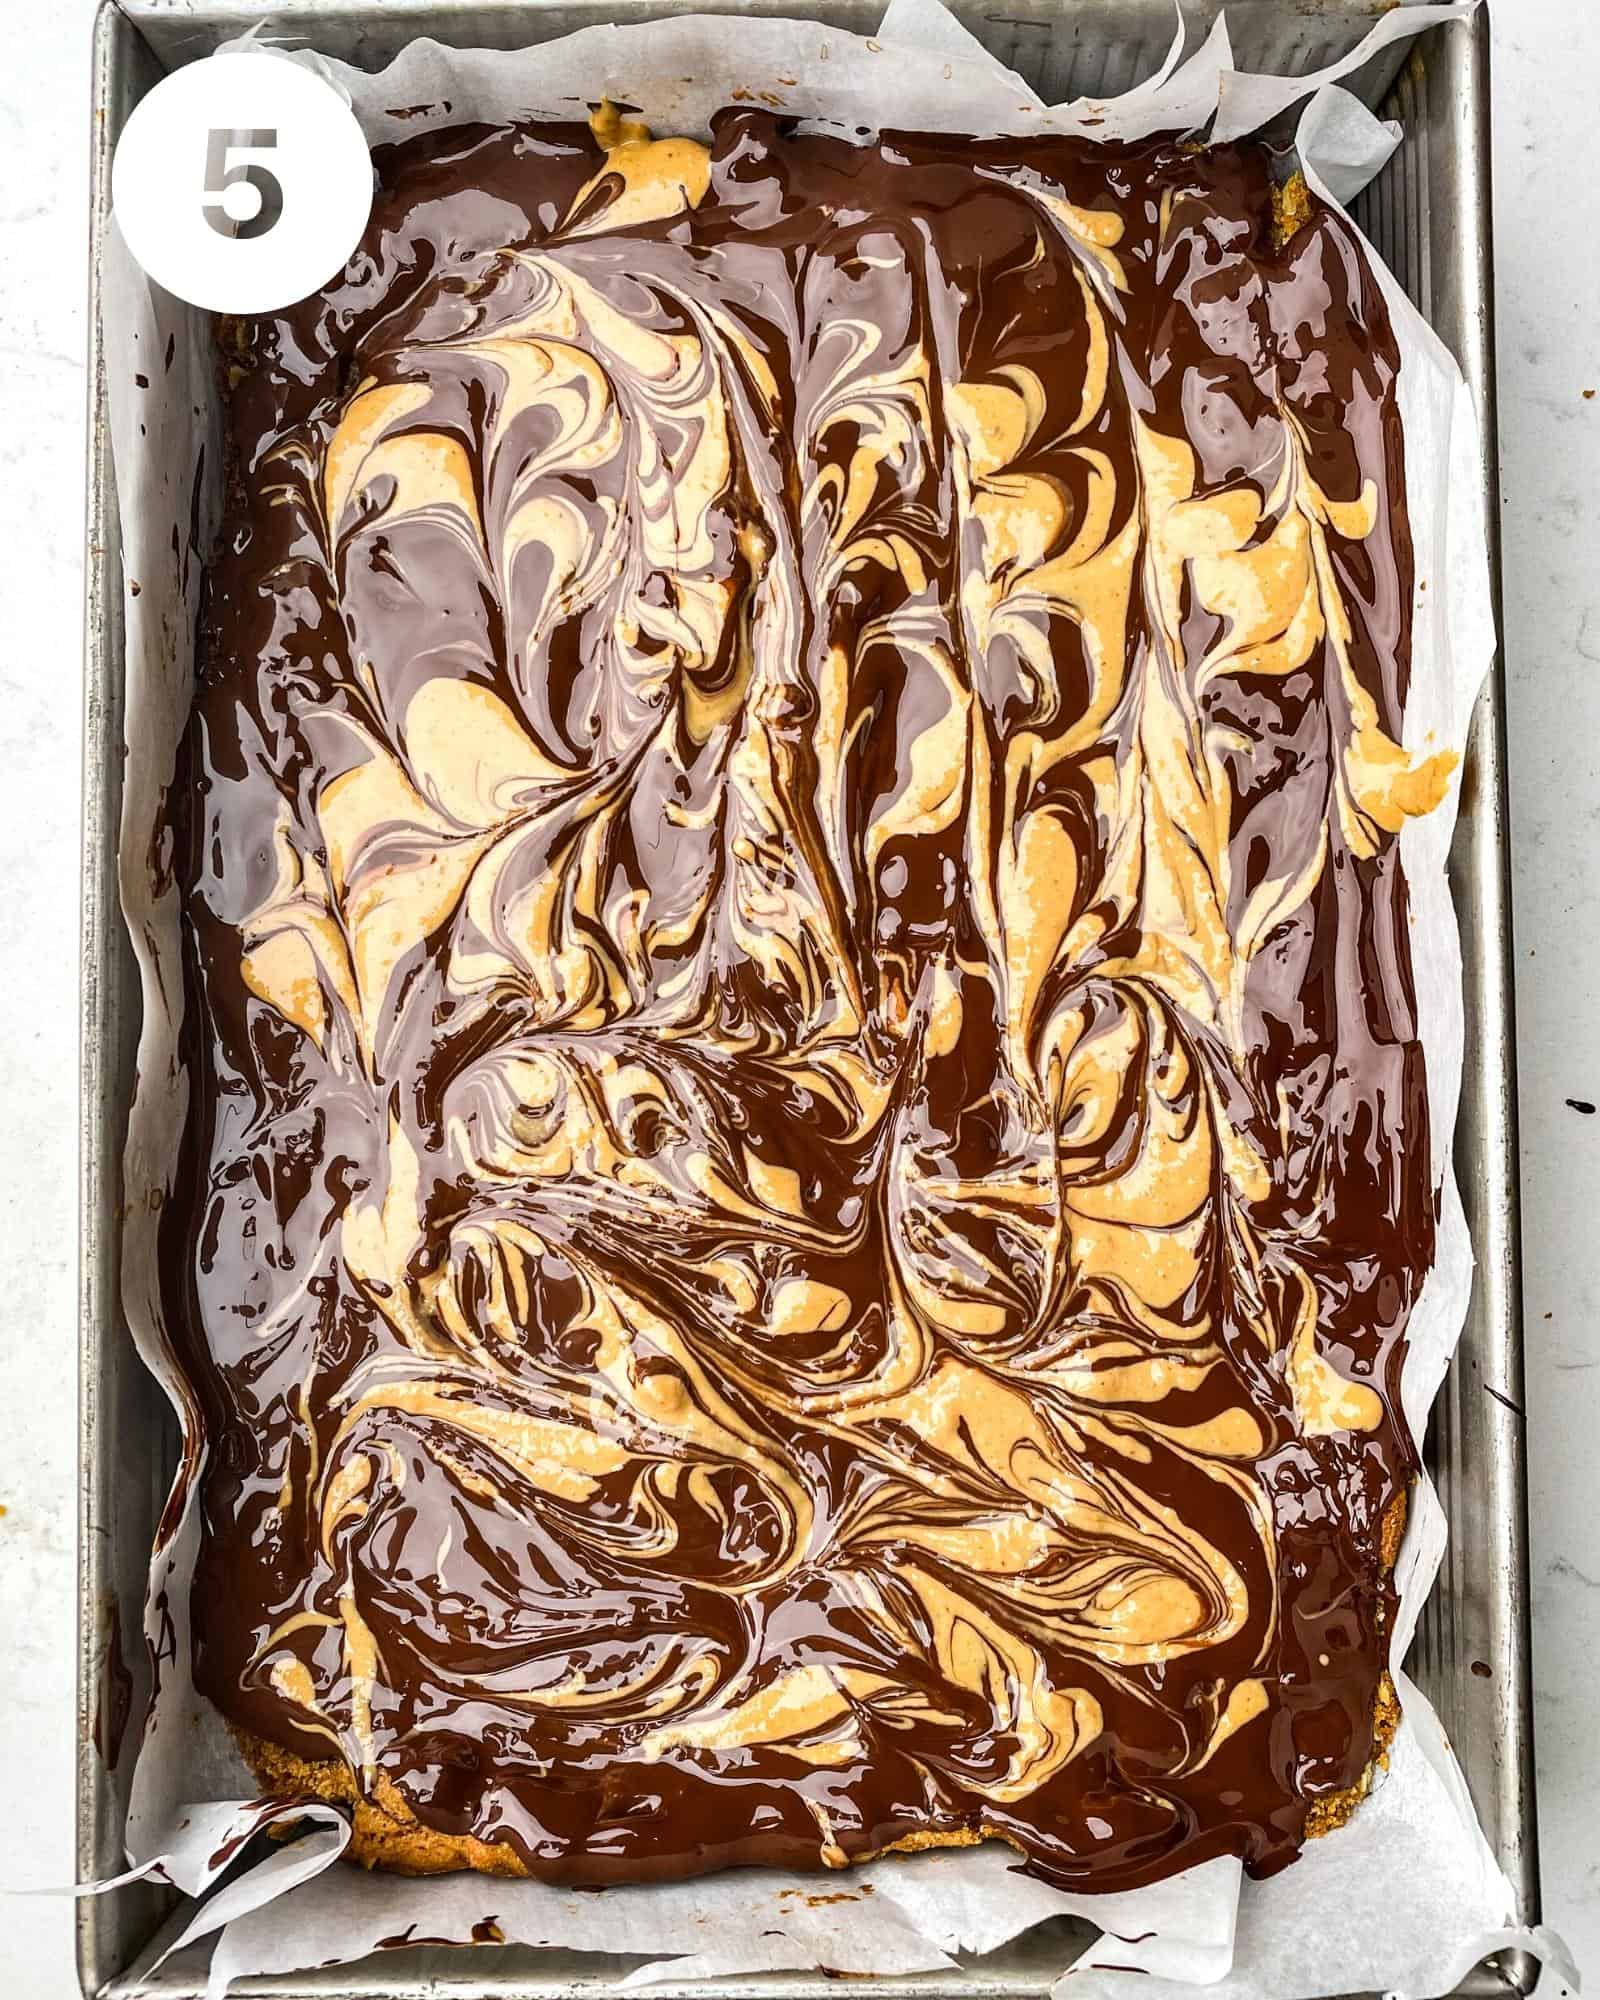 chocolate peanut butter oatmeal bars in a baking pan.